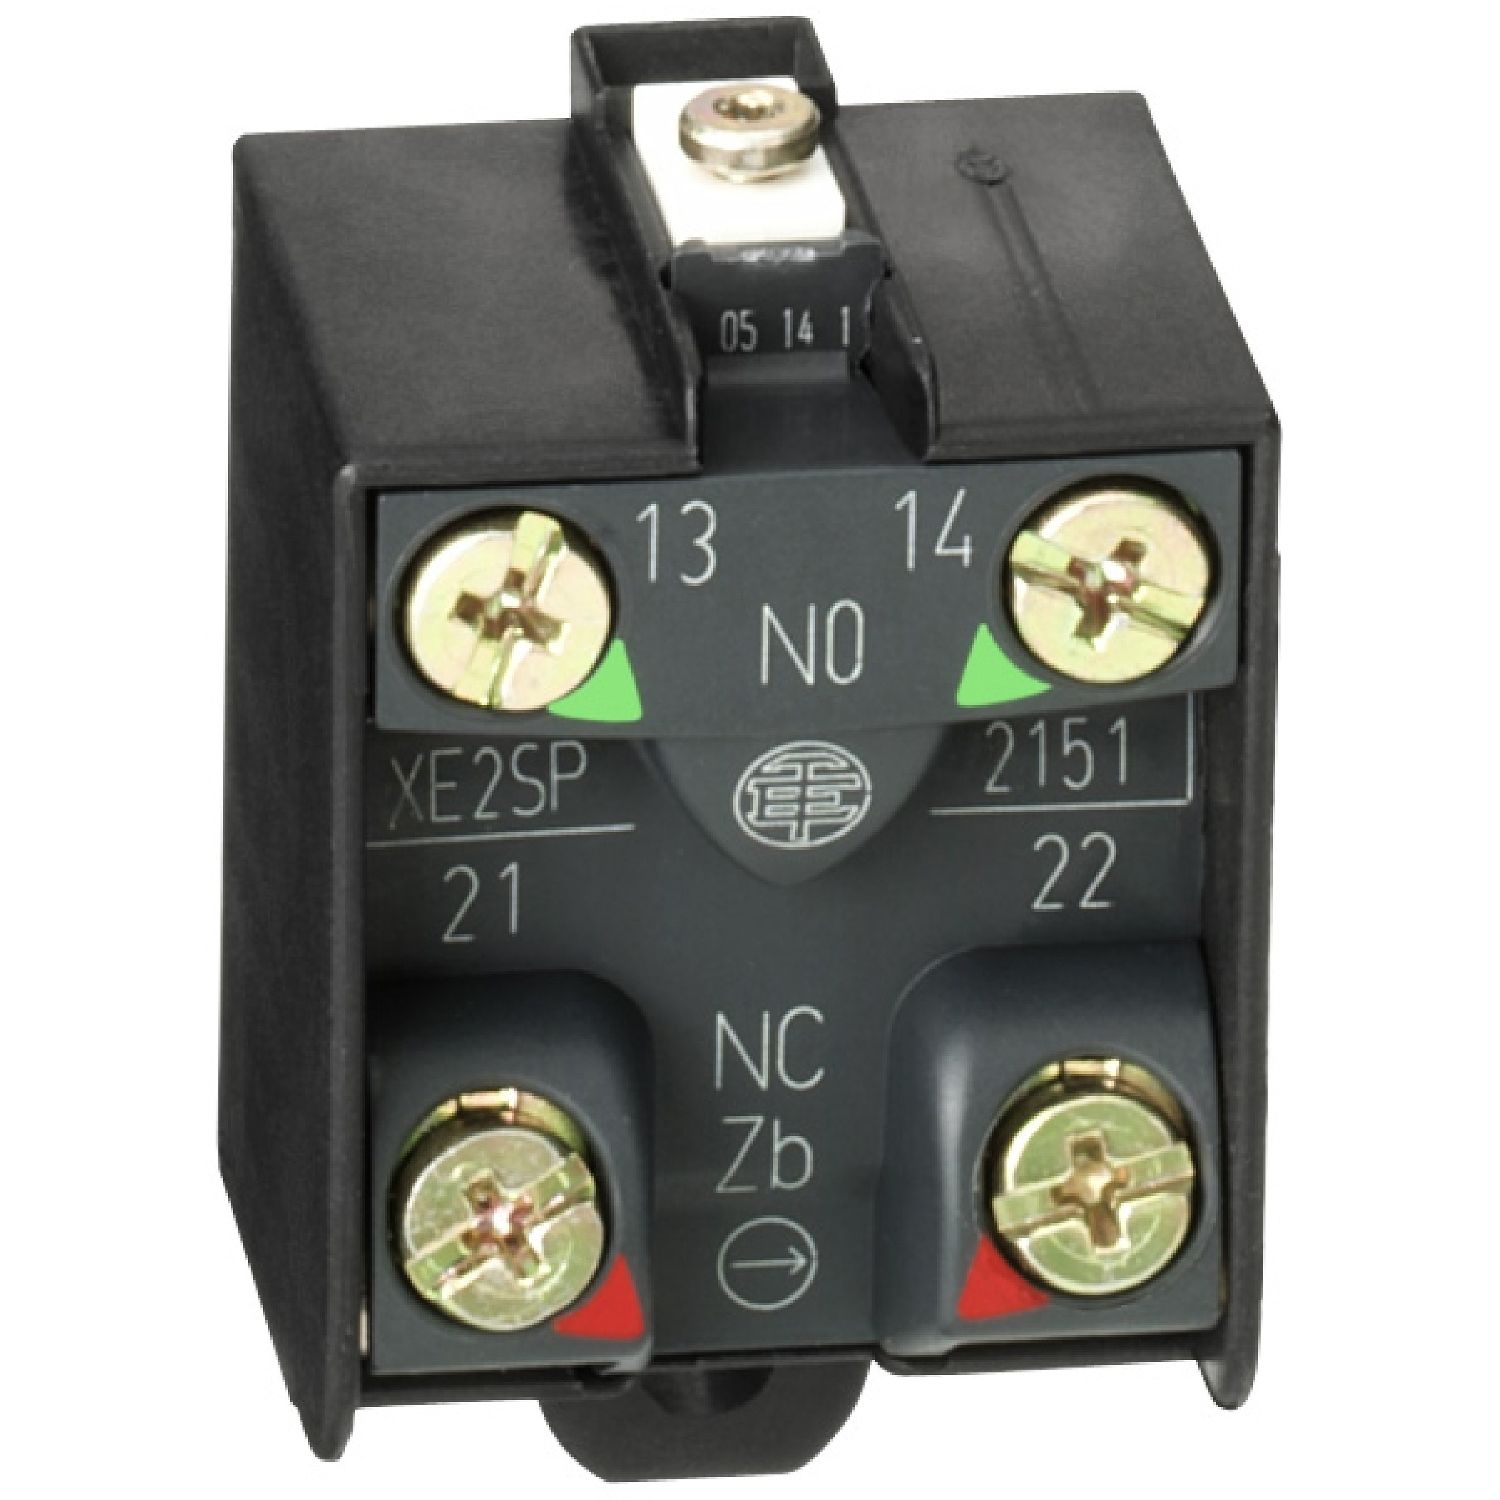 XE2SP2151 Limit switch contact block, Limit switches XC Standard, 1NC+1 NO, snap action